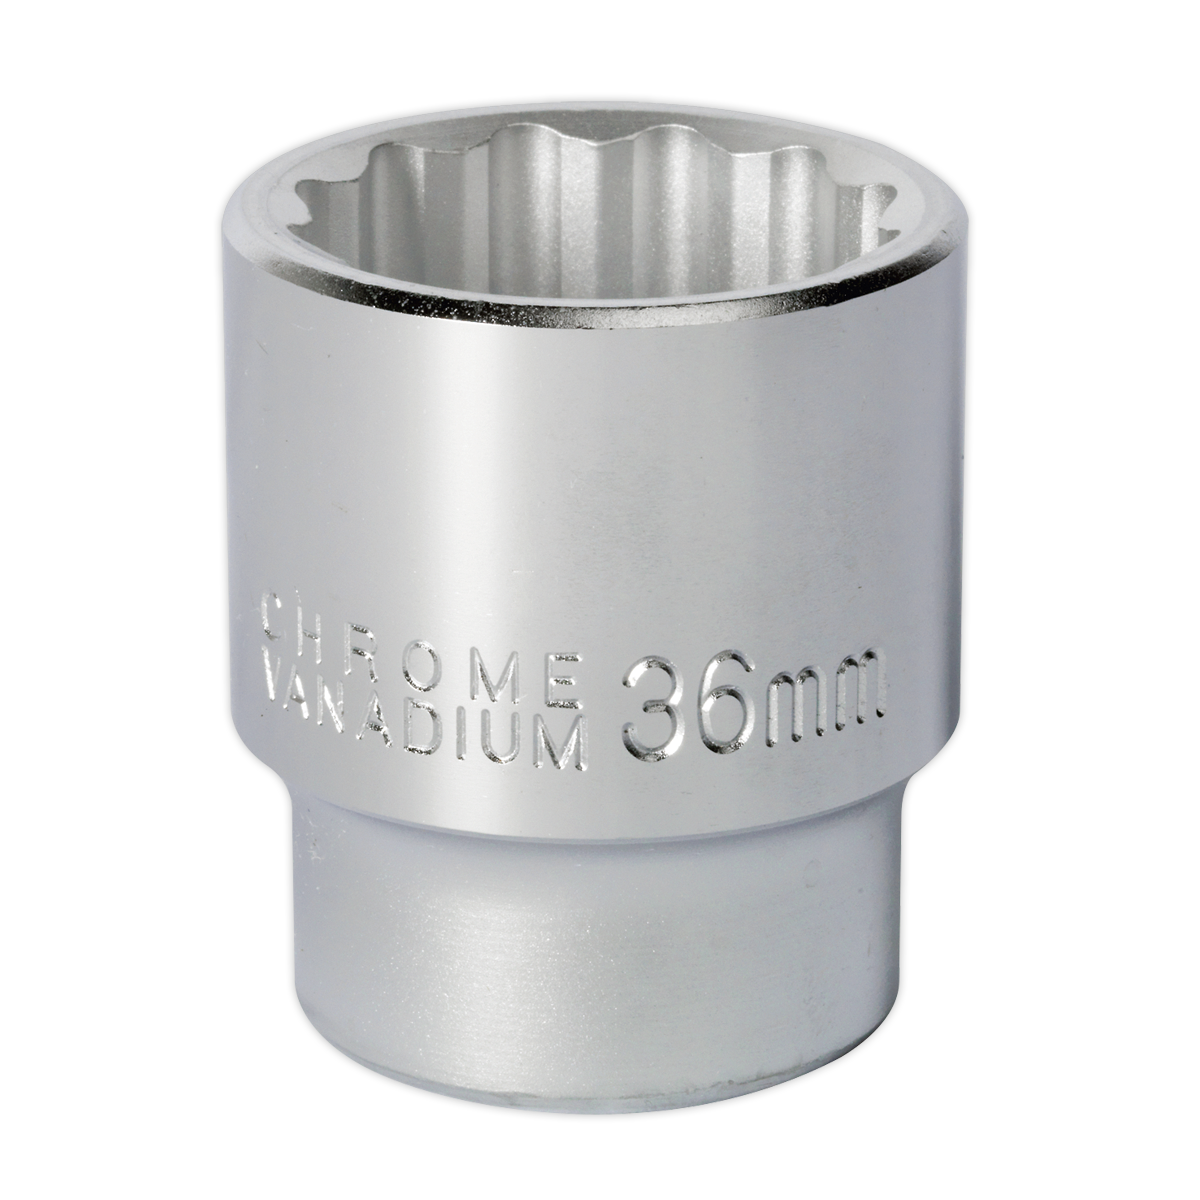 Sealey WallDrive® Socket 36mm 3/4"Sq Drive S34/36 | Forged Chrome Vanadium steel socket, hardened and tempered for added strength. | toolforce.ie